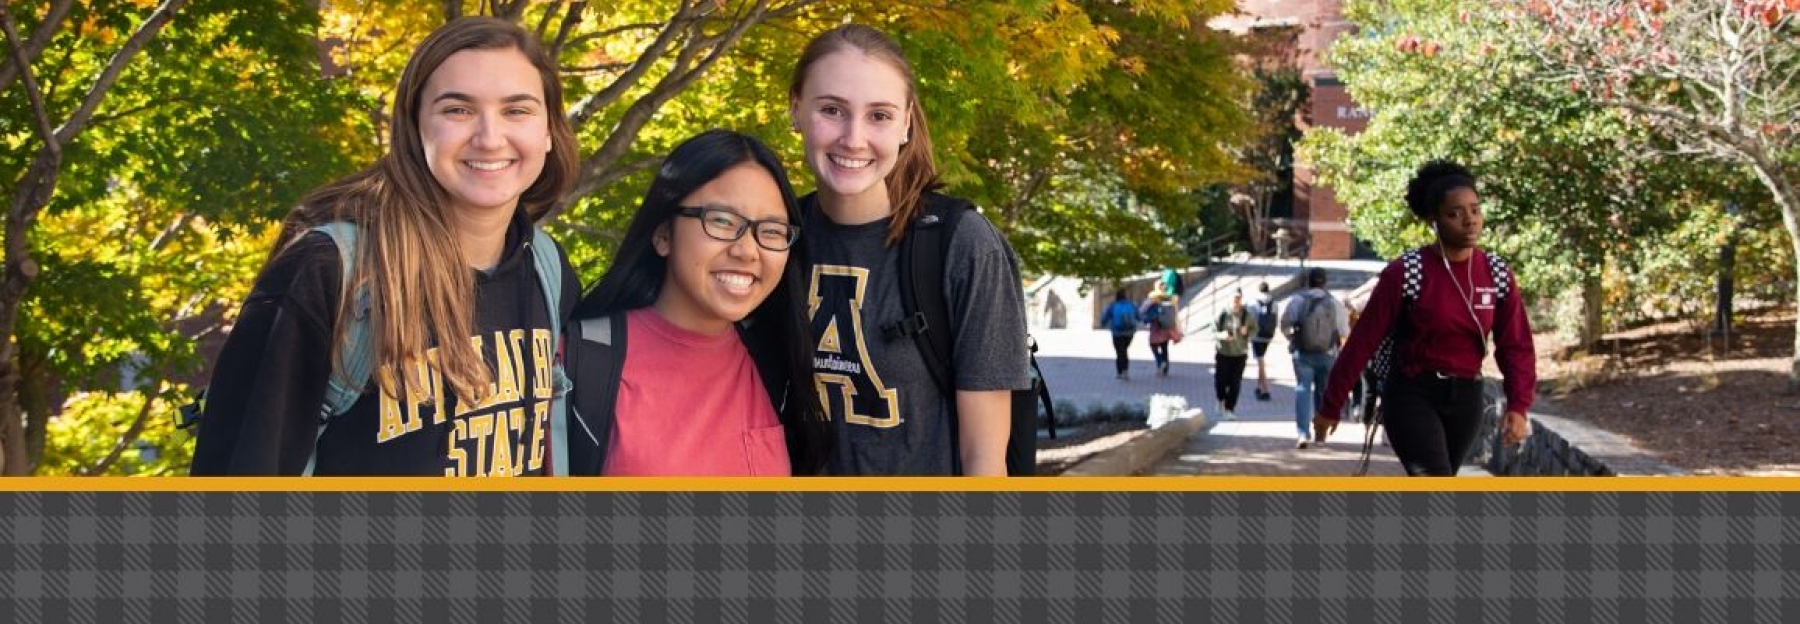 App State Students enjoying the fall weather on campus 